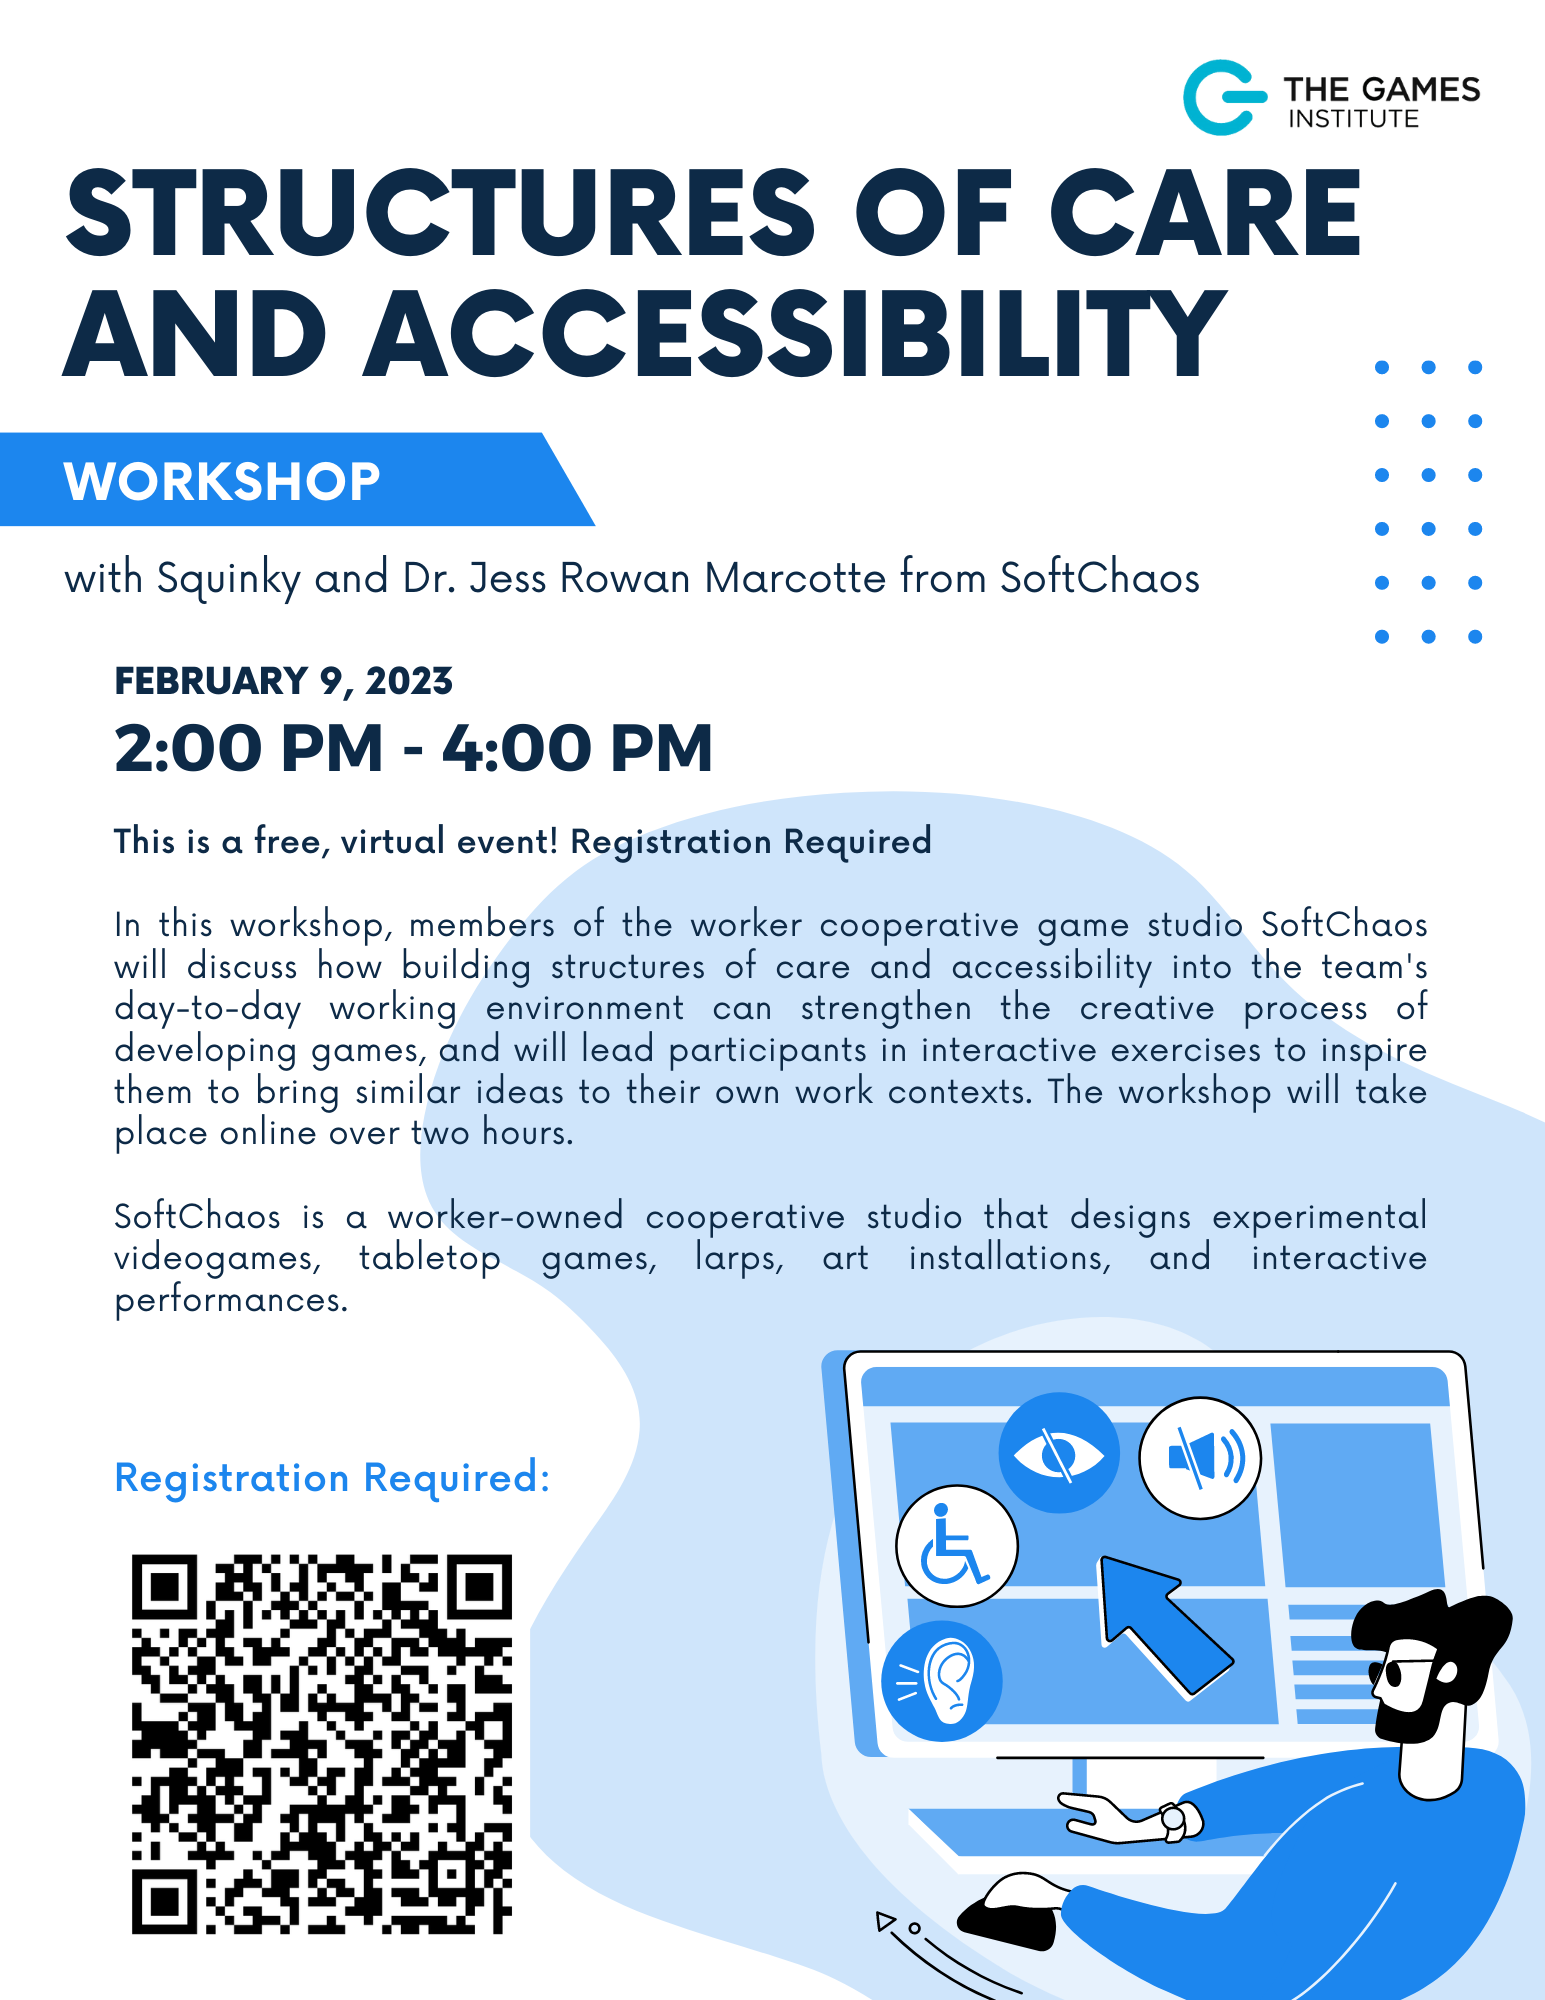 A promotional poster for the Workshop on Structures of Care and Accessibility 